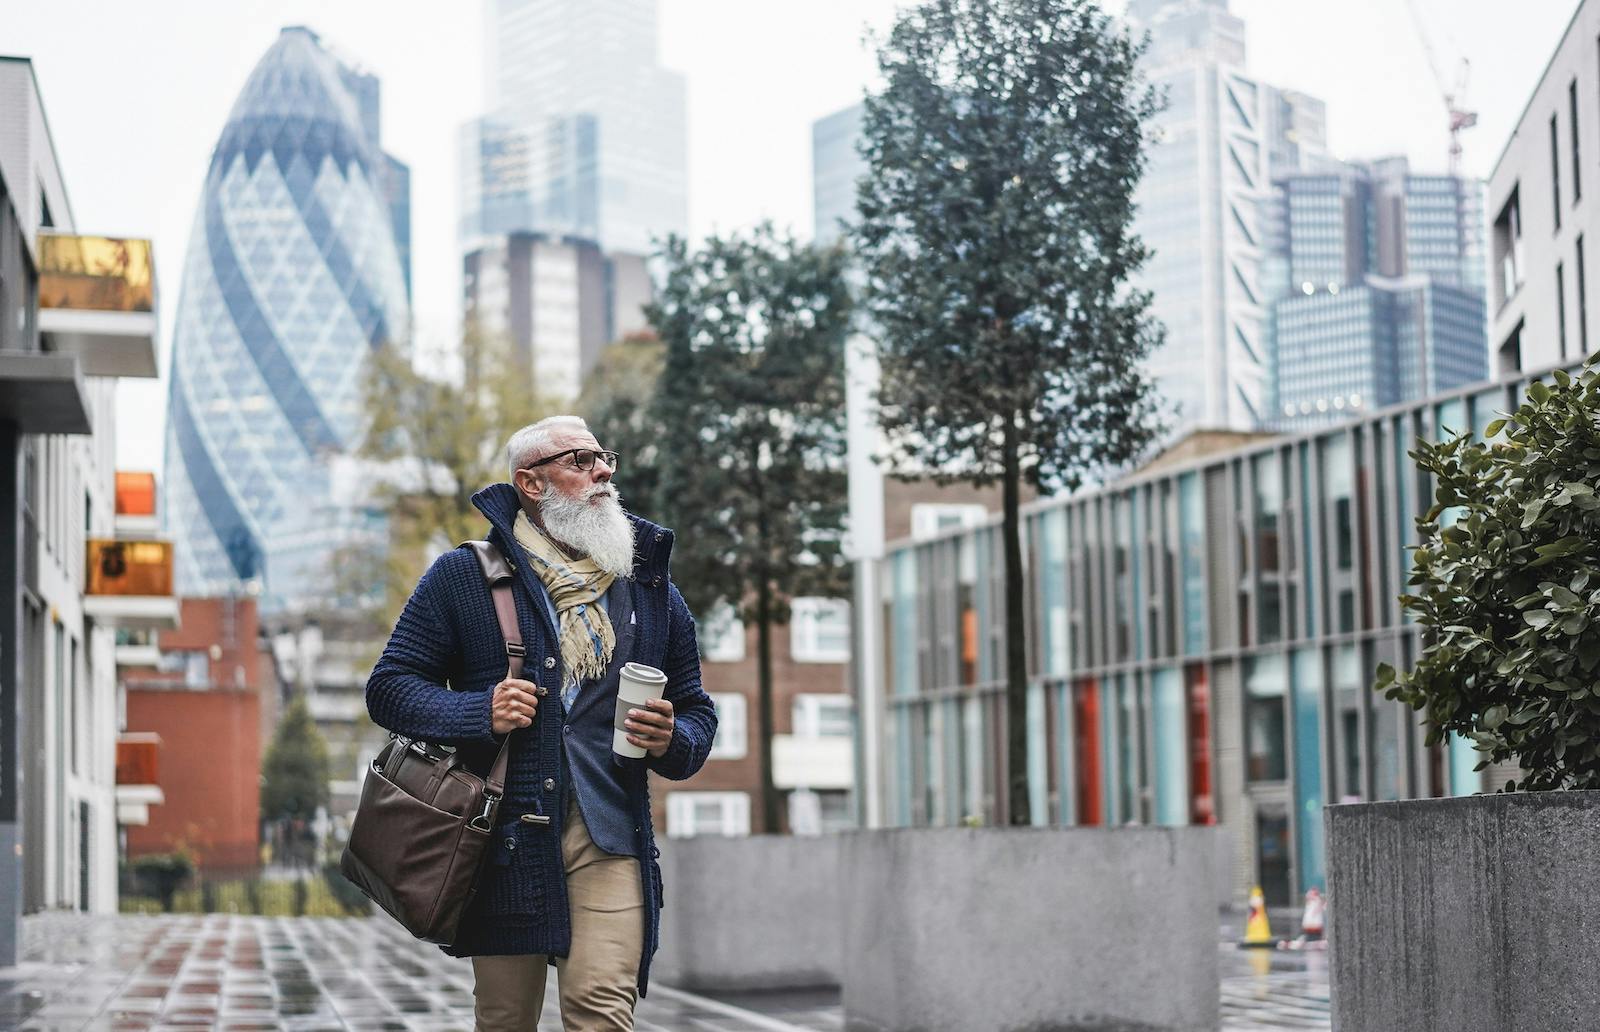 Bearded man carrying a coffee cup and shoulder bag on a walkway in London